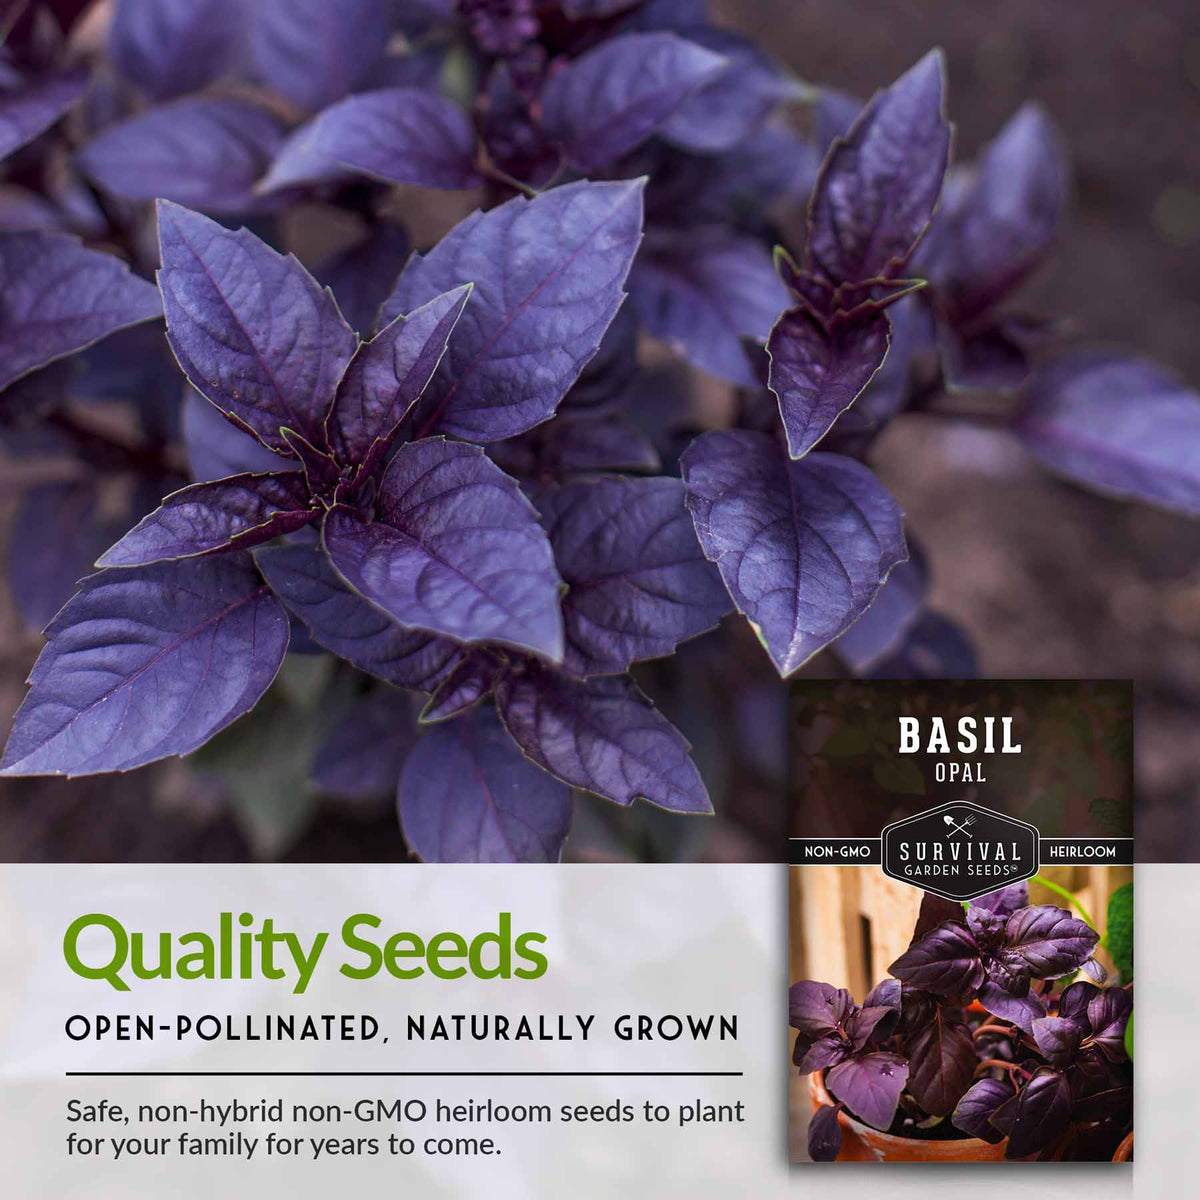 Quality open-pollinated opal basil seeds